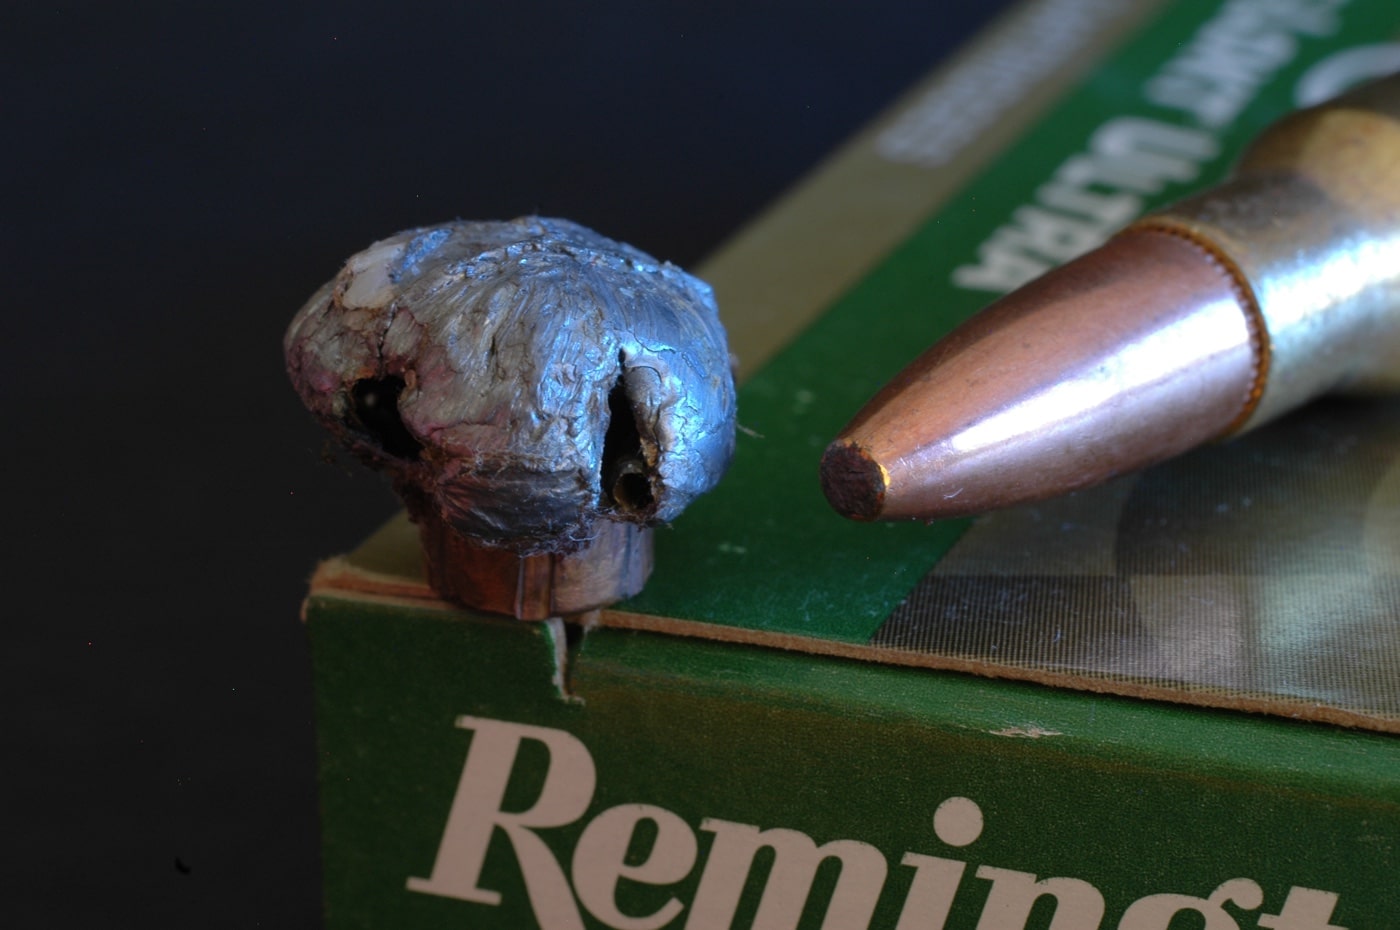 In this photograph, we see a Remington Arms cartridge load with an expanded soft point bullet. The ammo is much better for expansion in soft tissue than a FMJ bullet that is likely to over penetrate as compared to a hollow point or soft point load. 